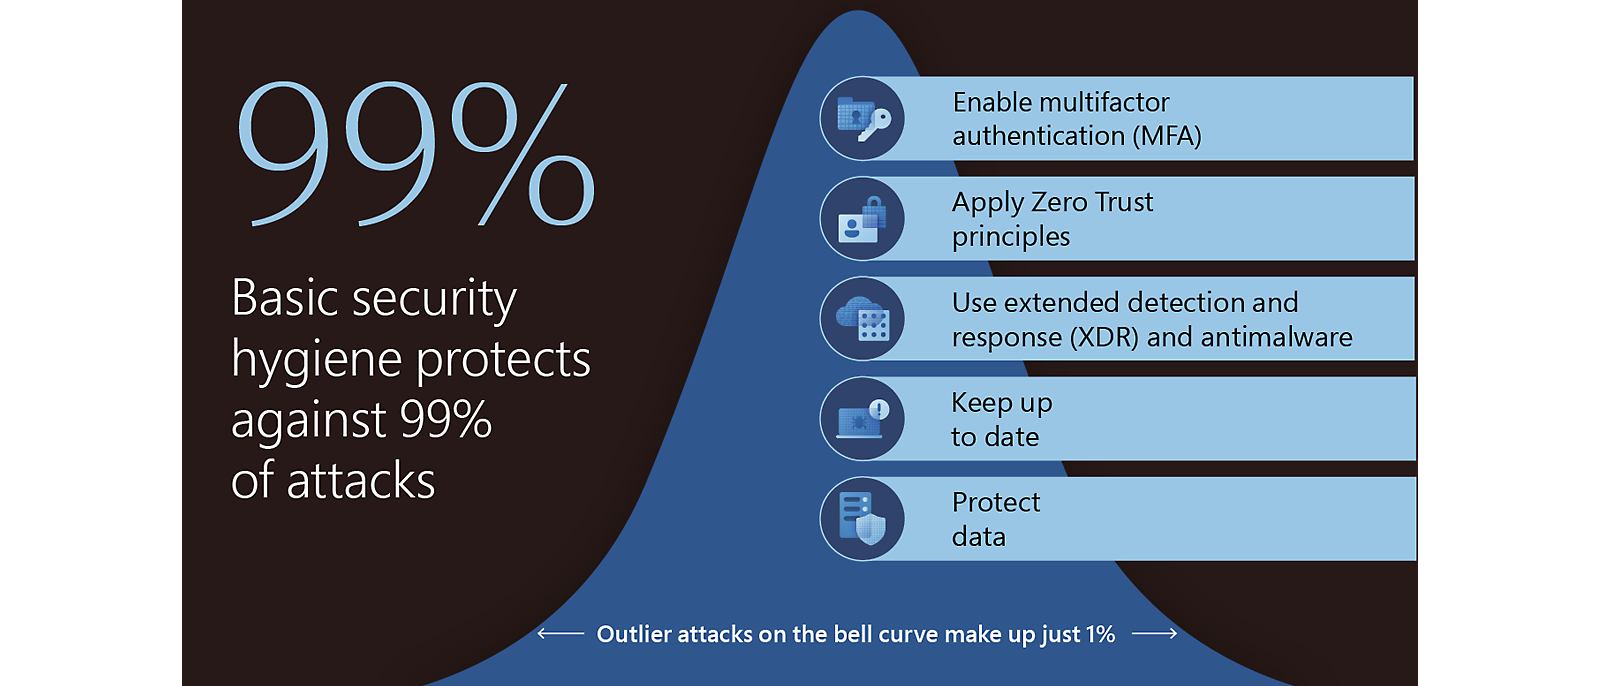 Basic security hygiene still protects against 99% of attacks